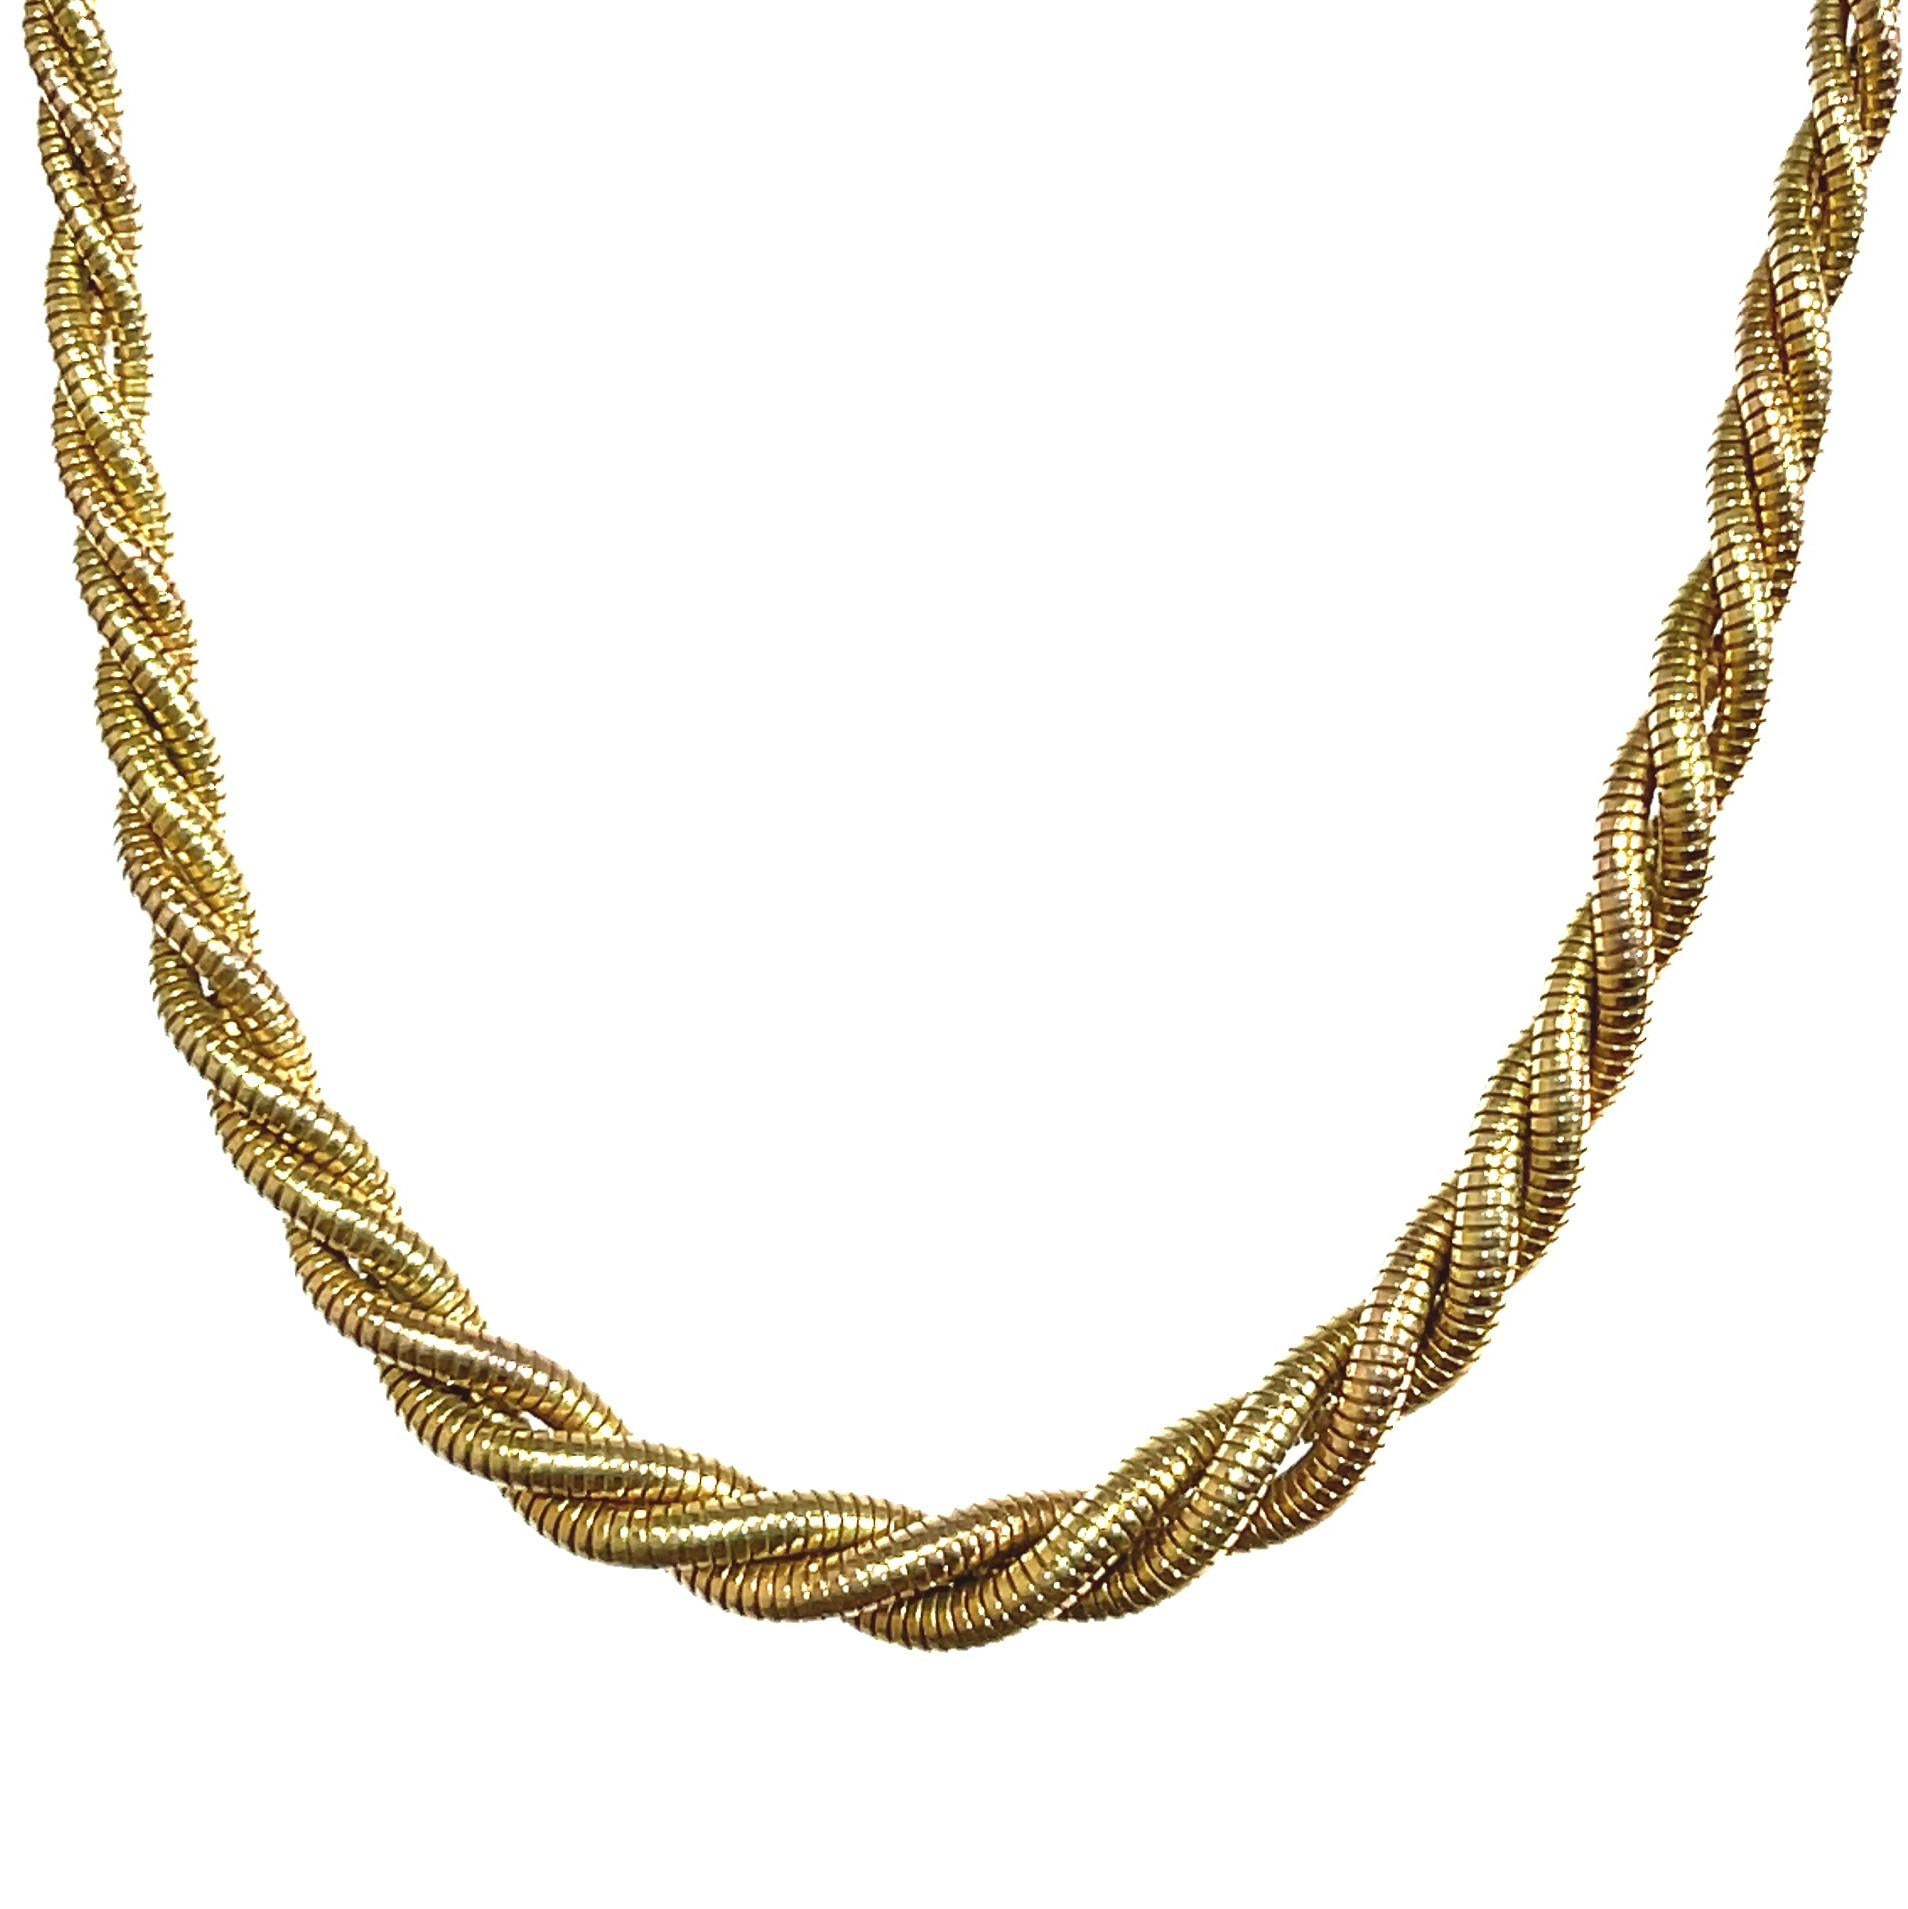 Women's or Men's Retro French 18k Yellow & Rose Gold Tubogas Necklace